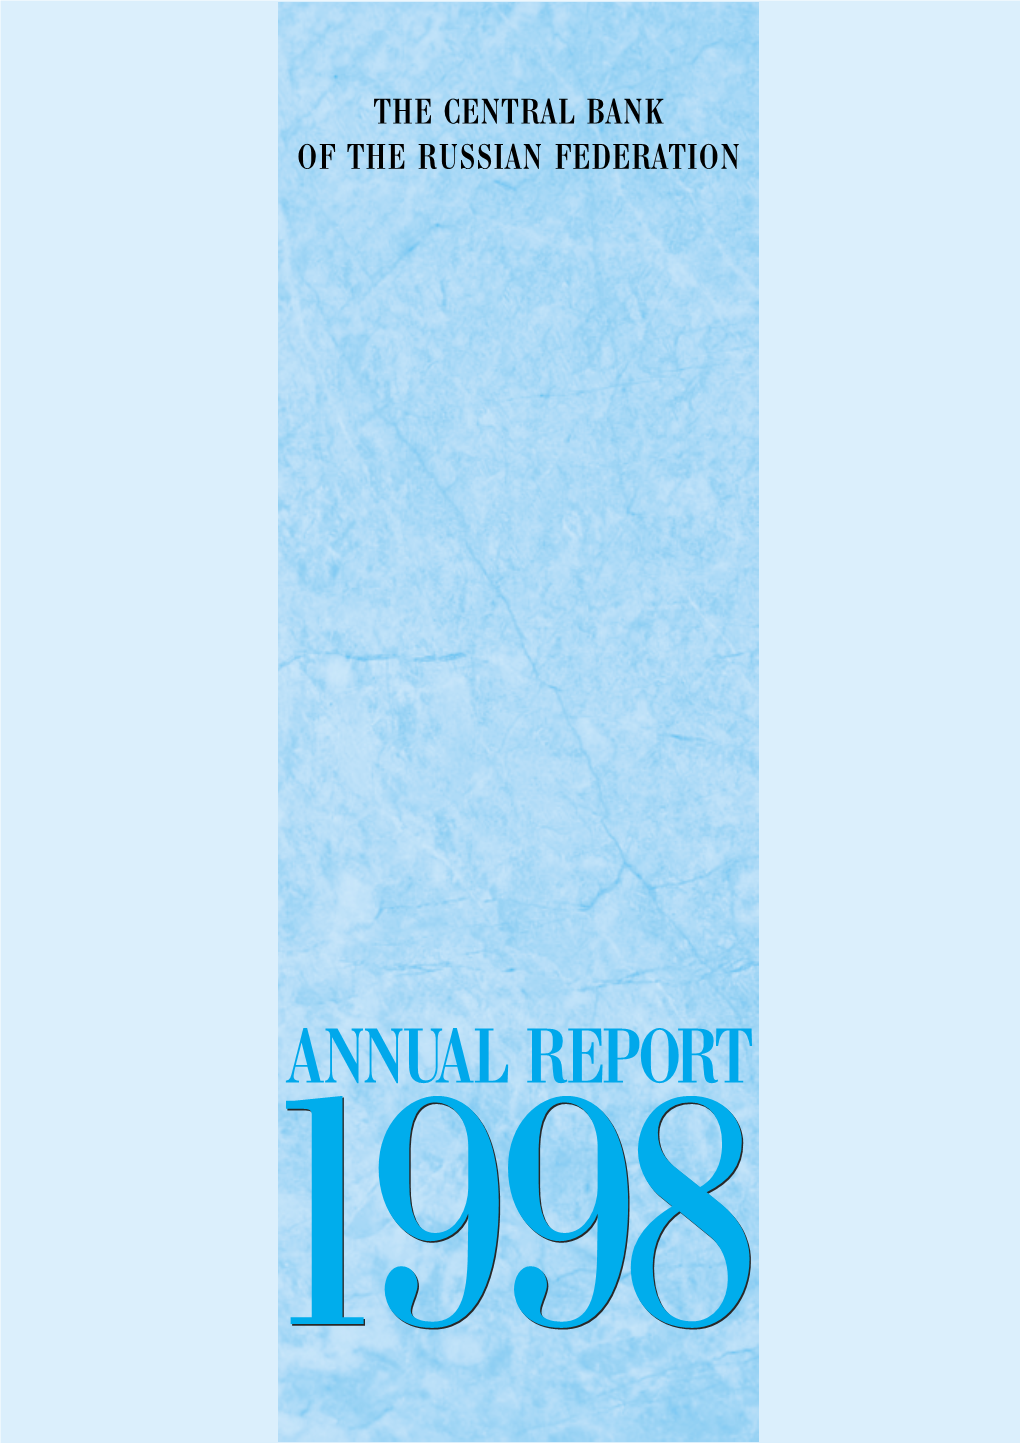 The Central Bank of the Russian Federation, Annual Report, 1998